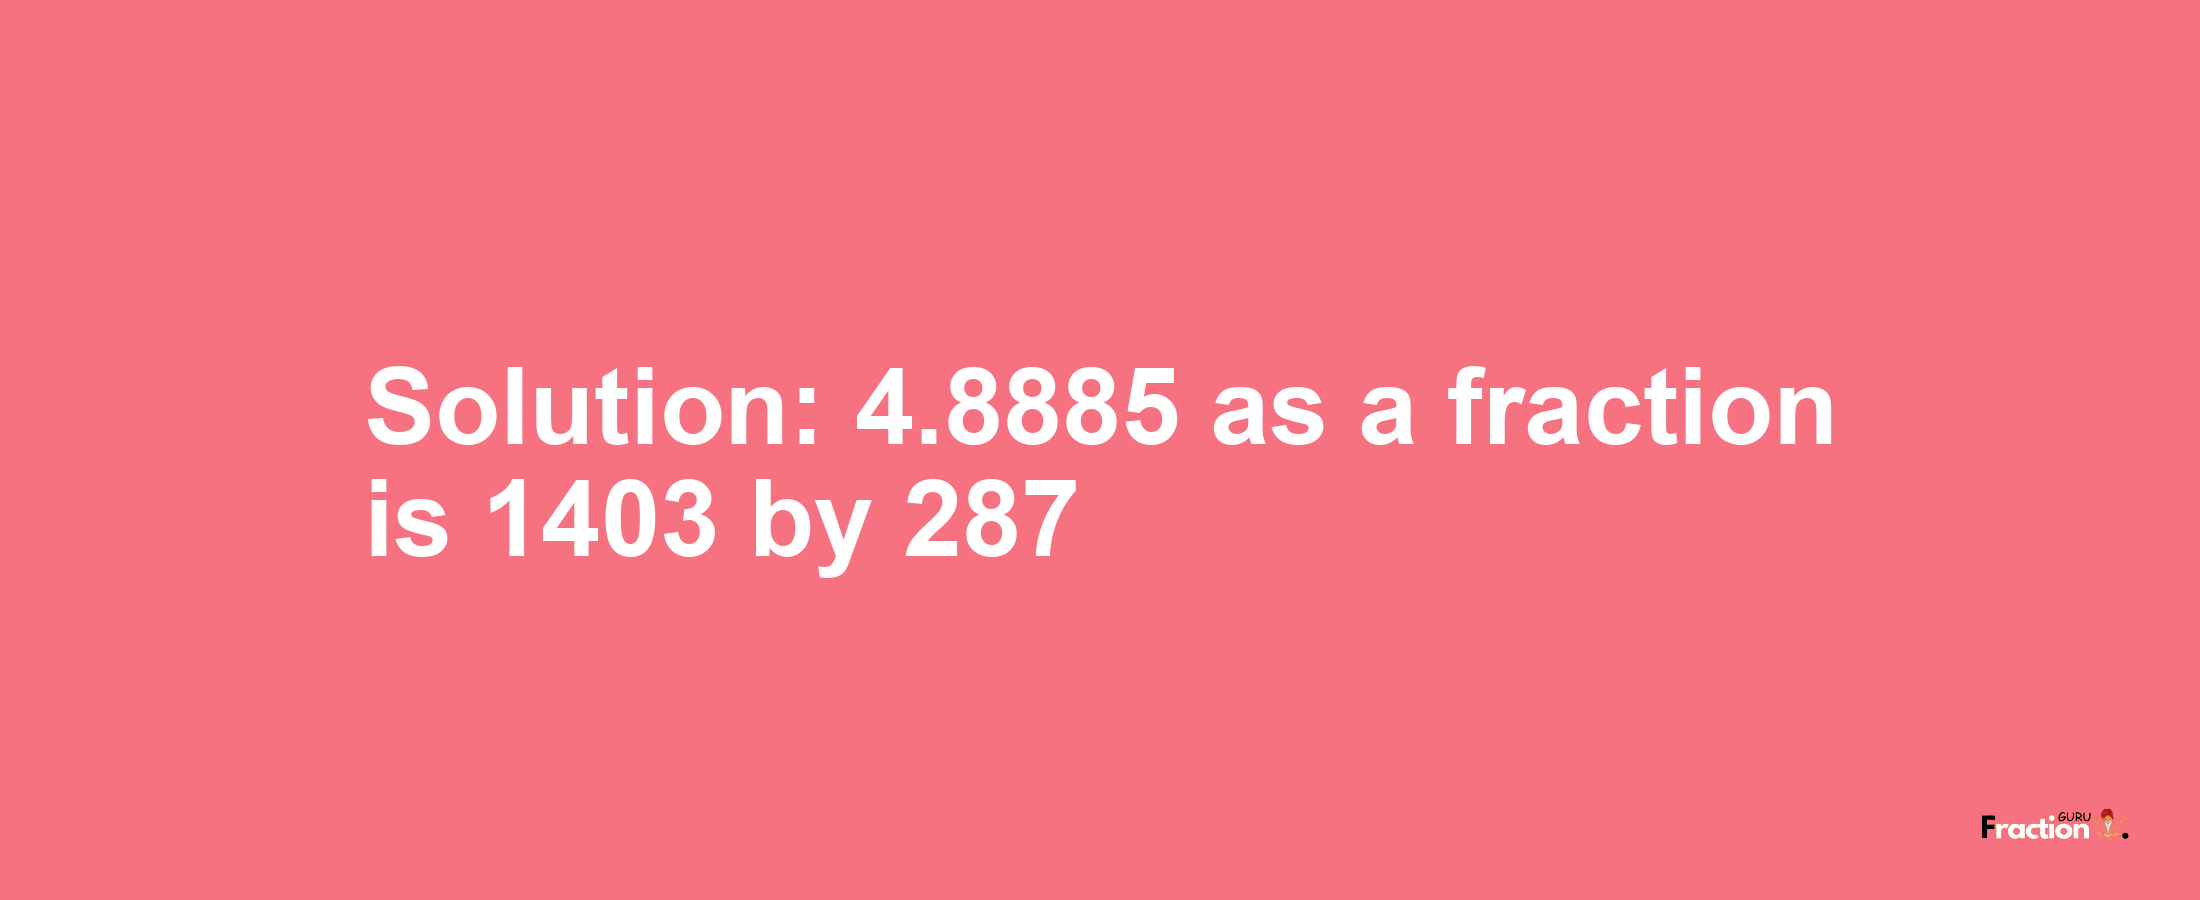 Solution:4.8885 as a fraction is 1403/287